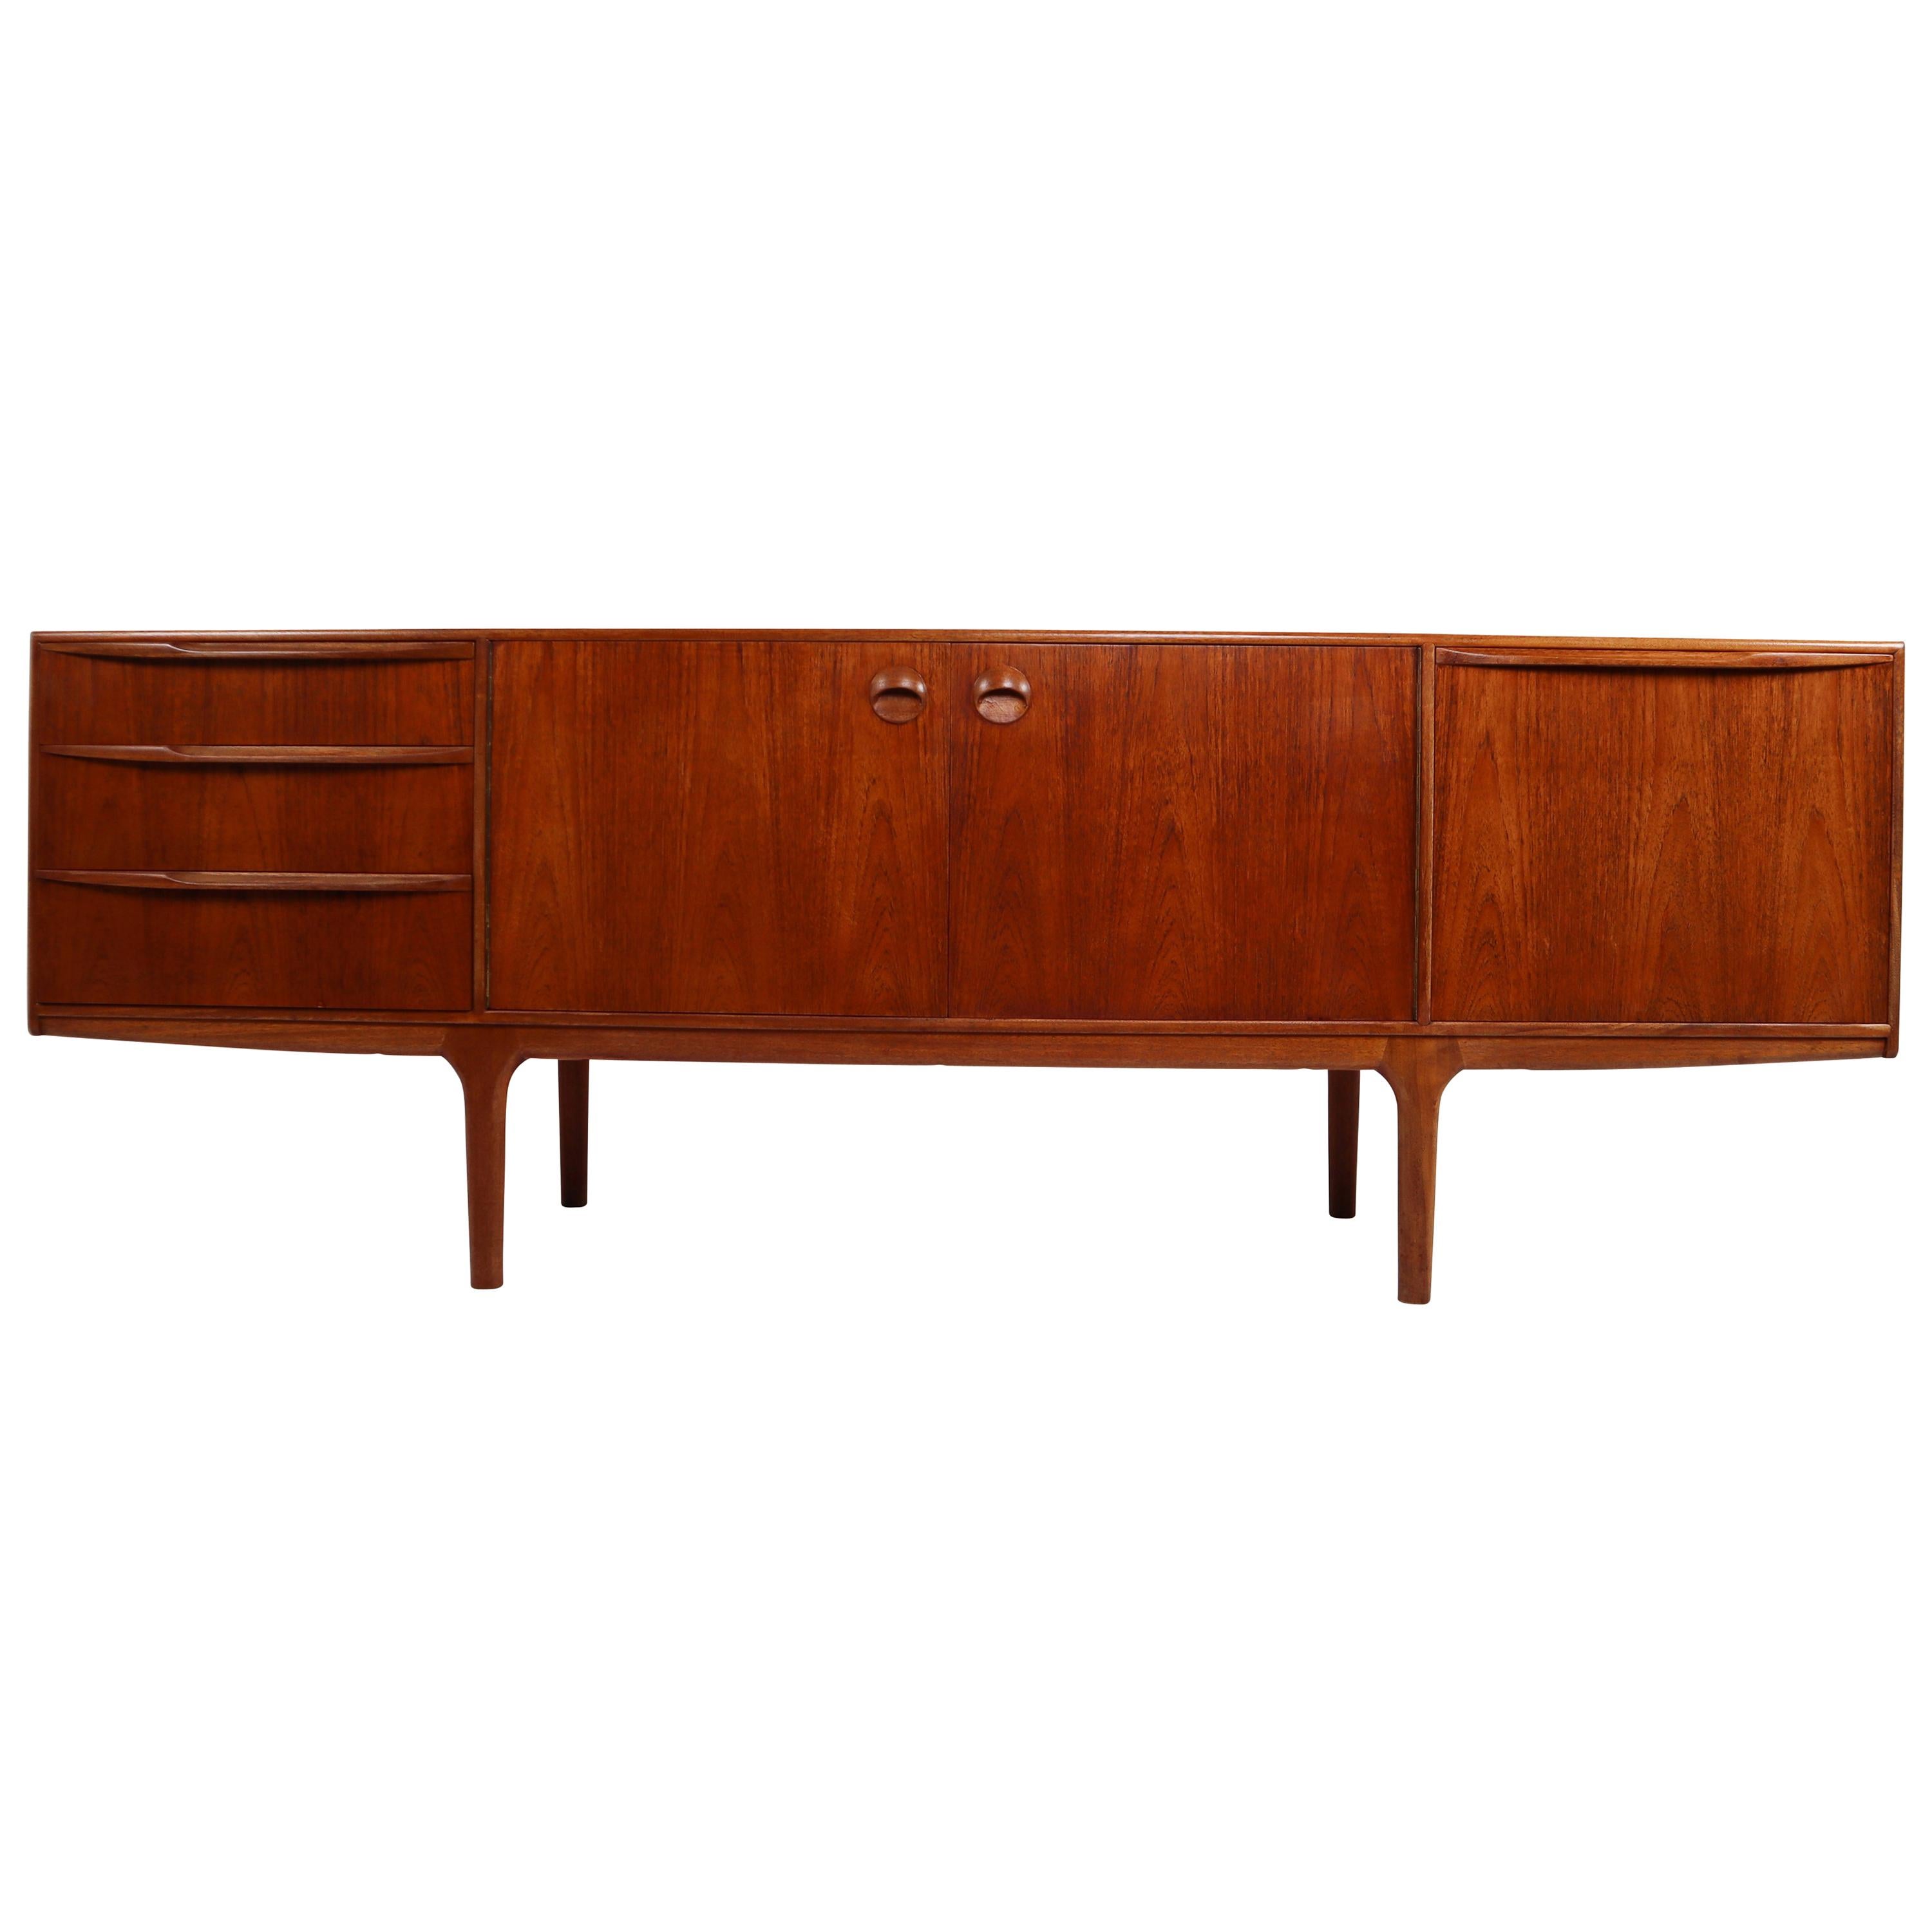 Mid-Century Modern Teak Sideboard Credenza by Tom Robertson for A.H. McIntosh